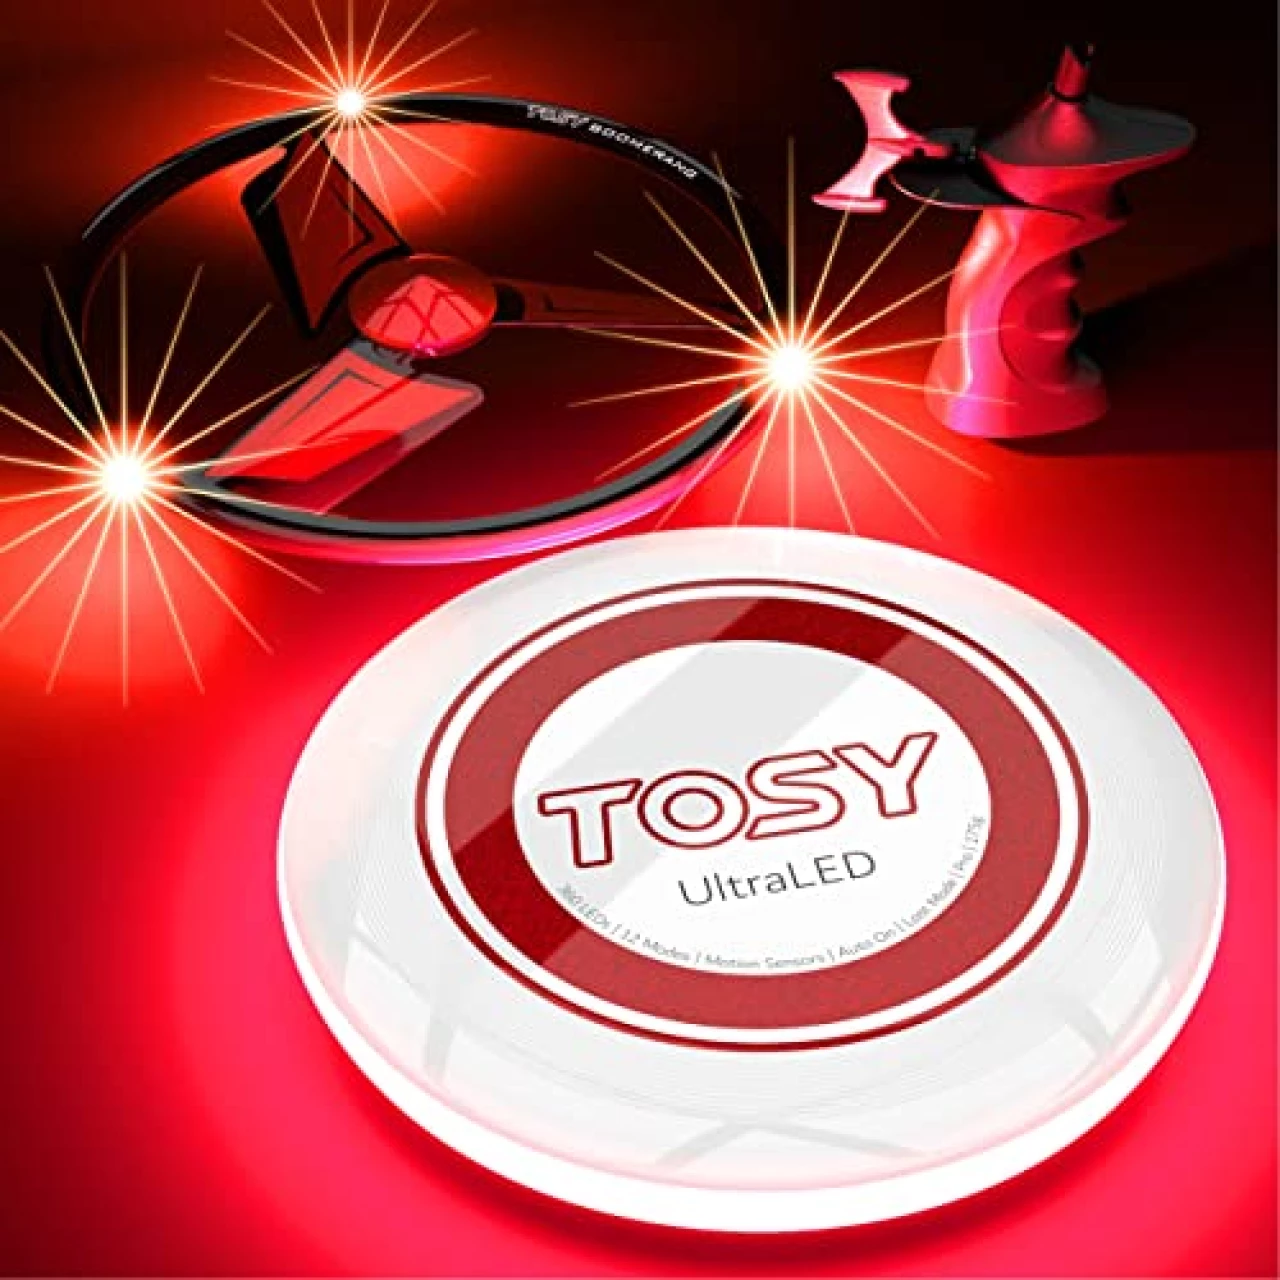 TOSY Patented Boomerang - 3 Super Bright LEDs, Rechargeable, Auto Light Up, Launcher &amp; Flying Disc/Frisbee Included, Perfect Outdoor Games, Birthday &amp; Camping Gift for Men/Boys/Teens/Kids